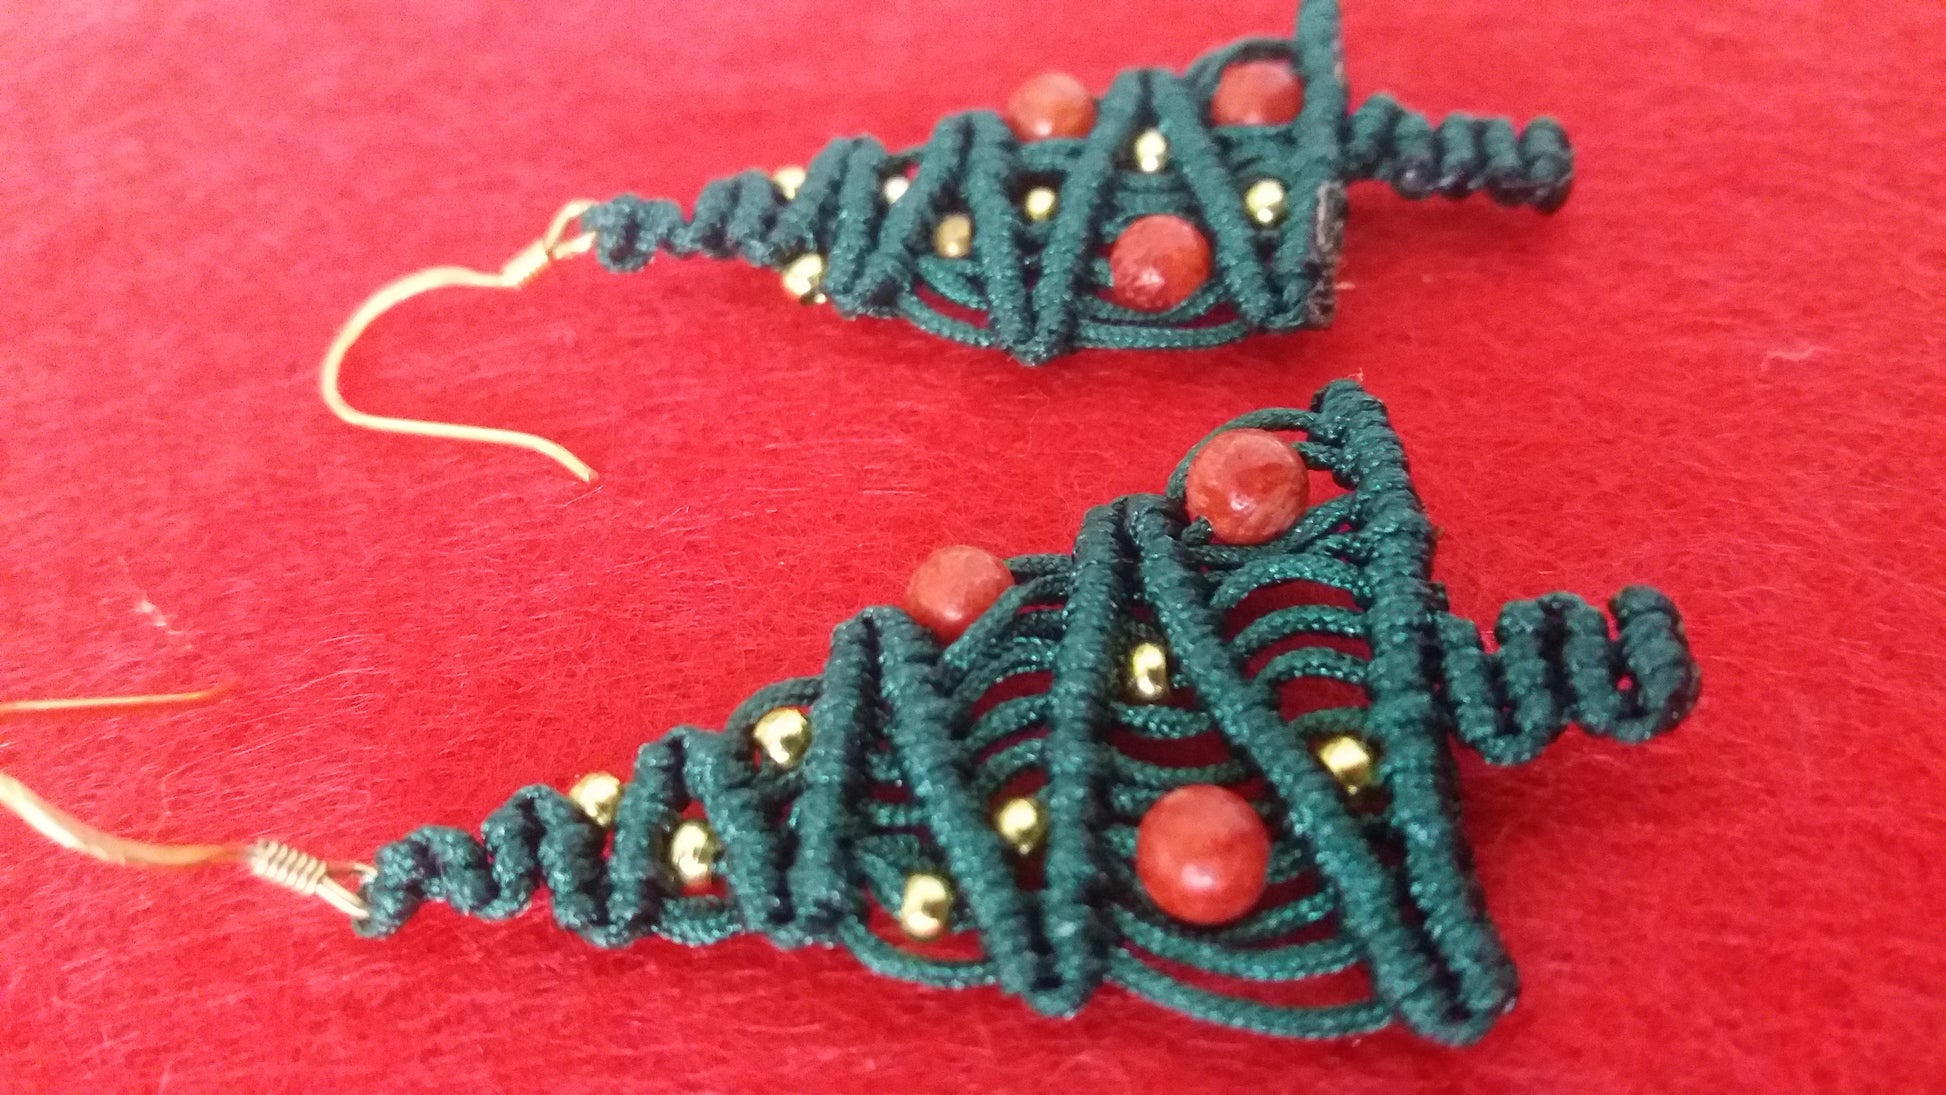 Macrame Christmas Tree Earrings Holiday Season New Year Gift for her Green Xmas Tree with Golden Brass Beads and Red Natural Corals